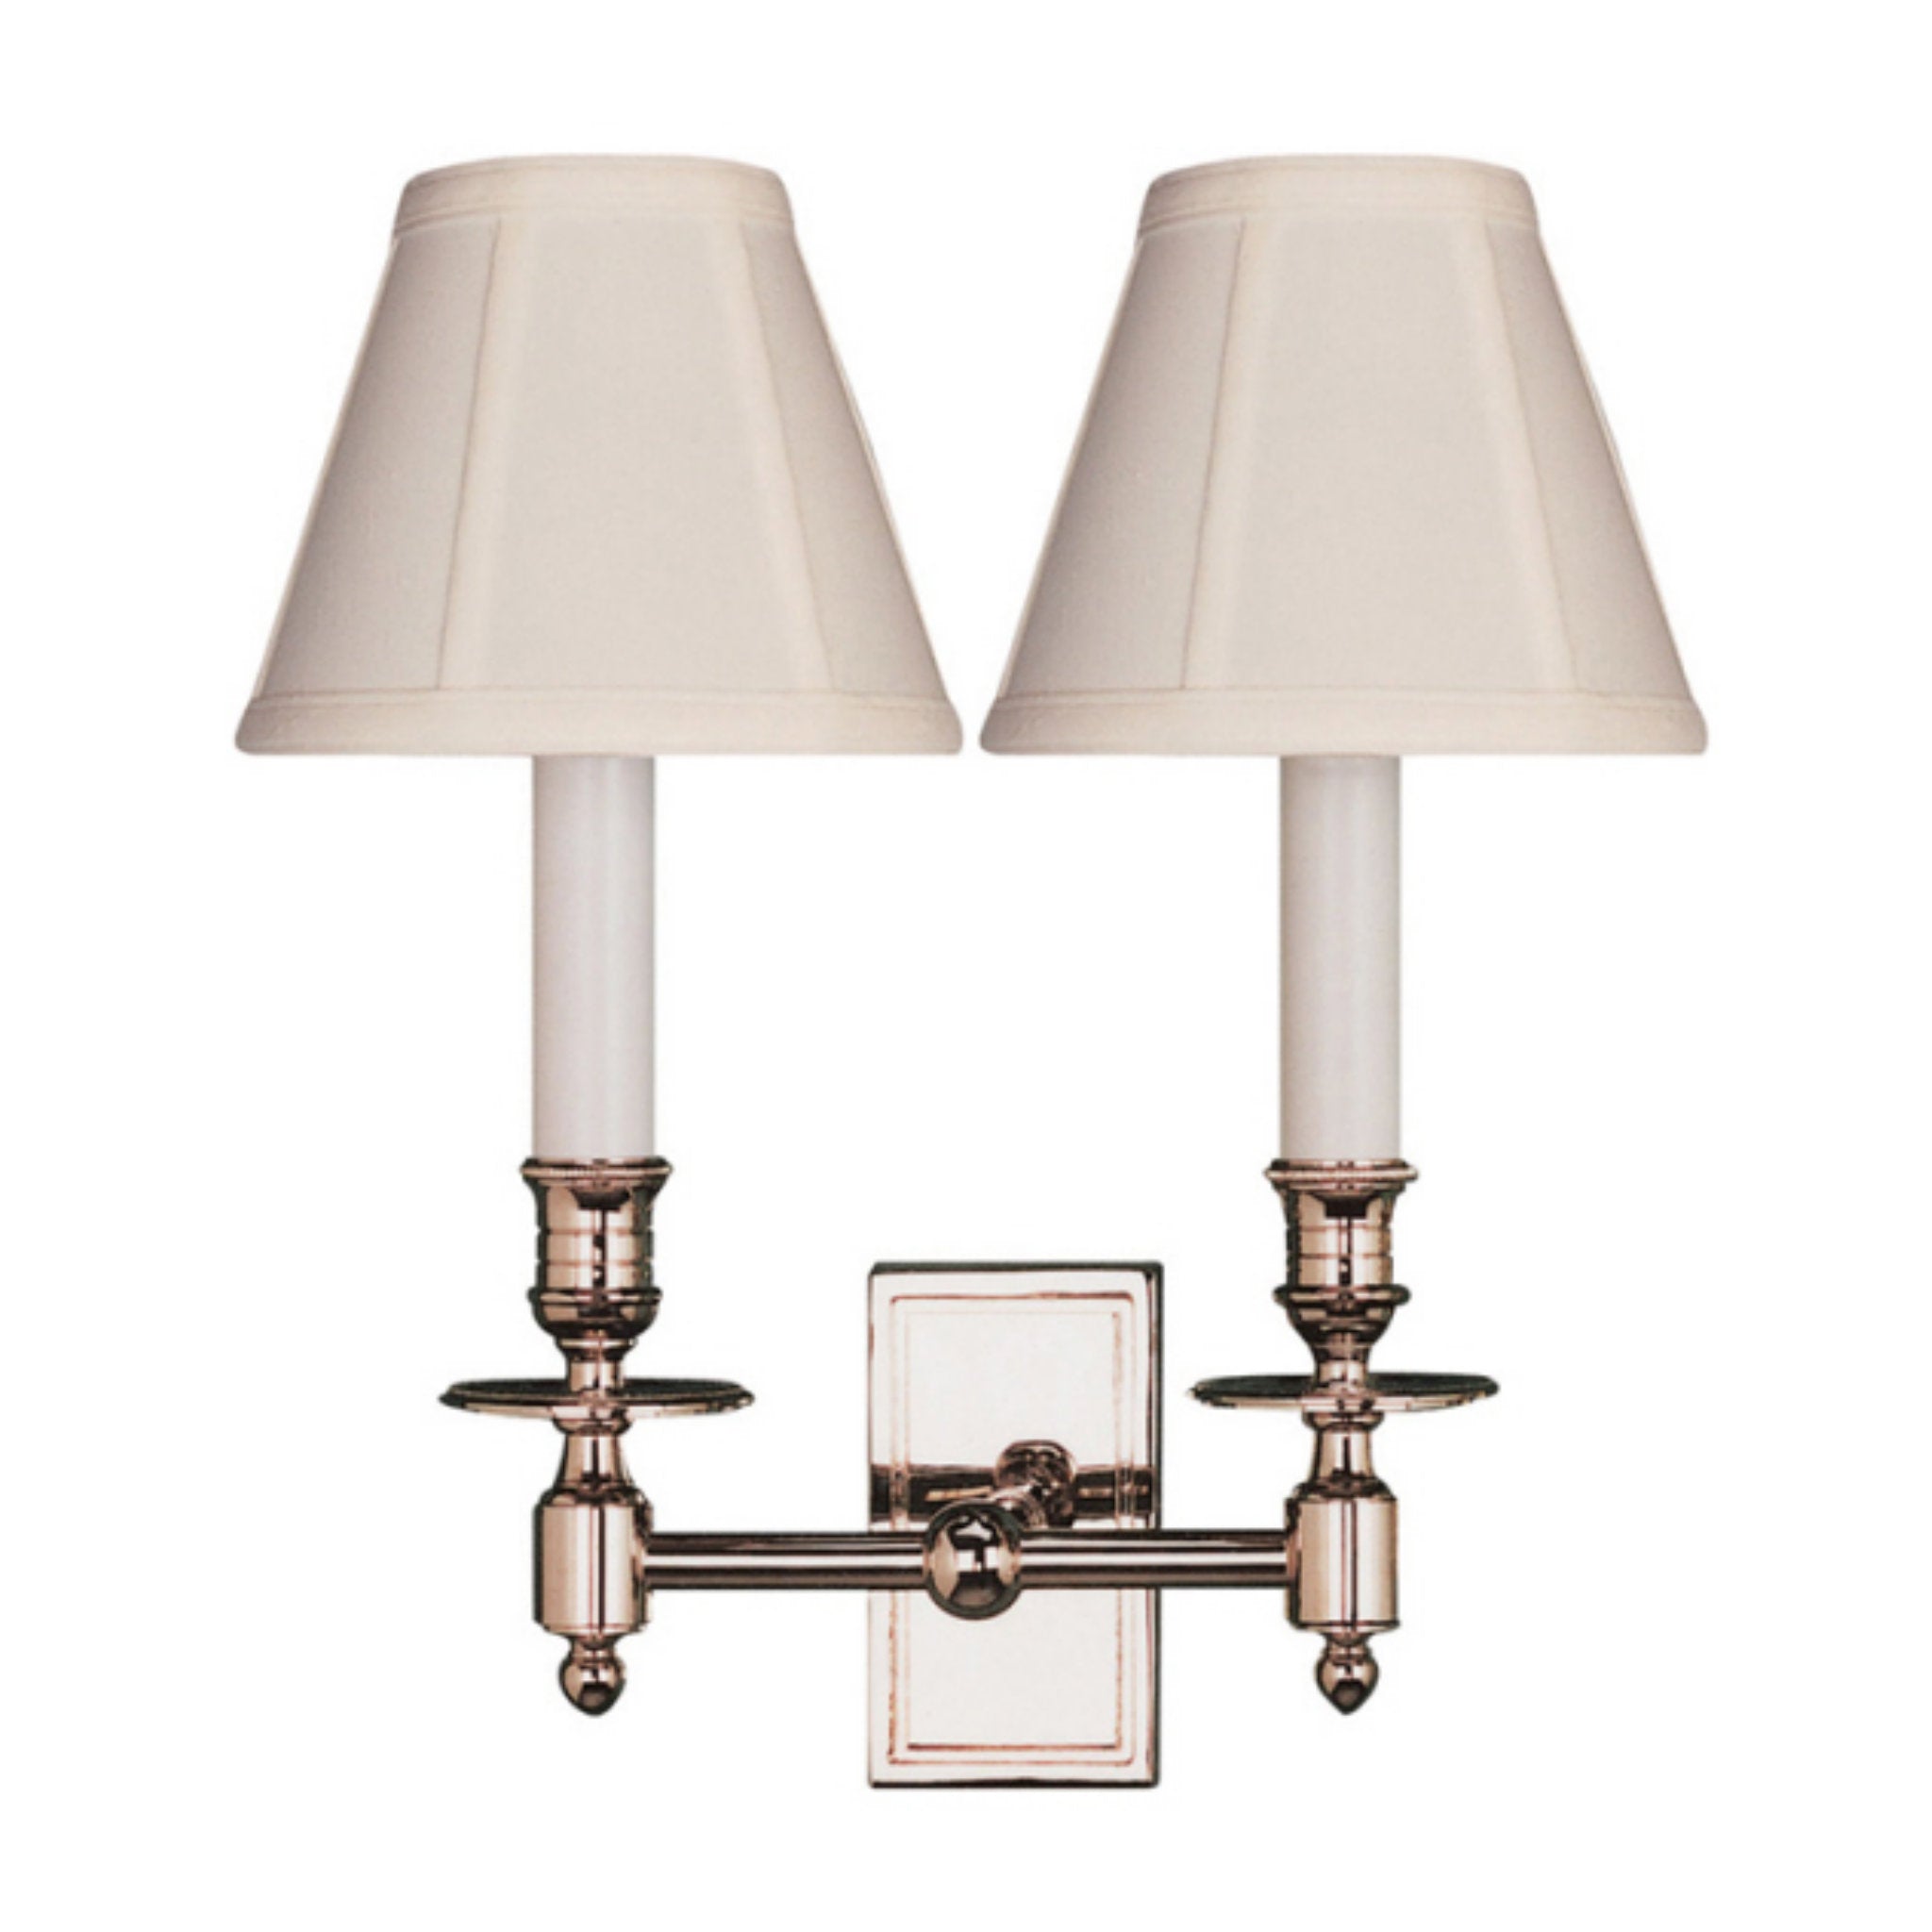 Visual Comfort French Double Library Sconce in Polished Nickel with Tissue Shades